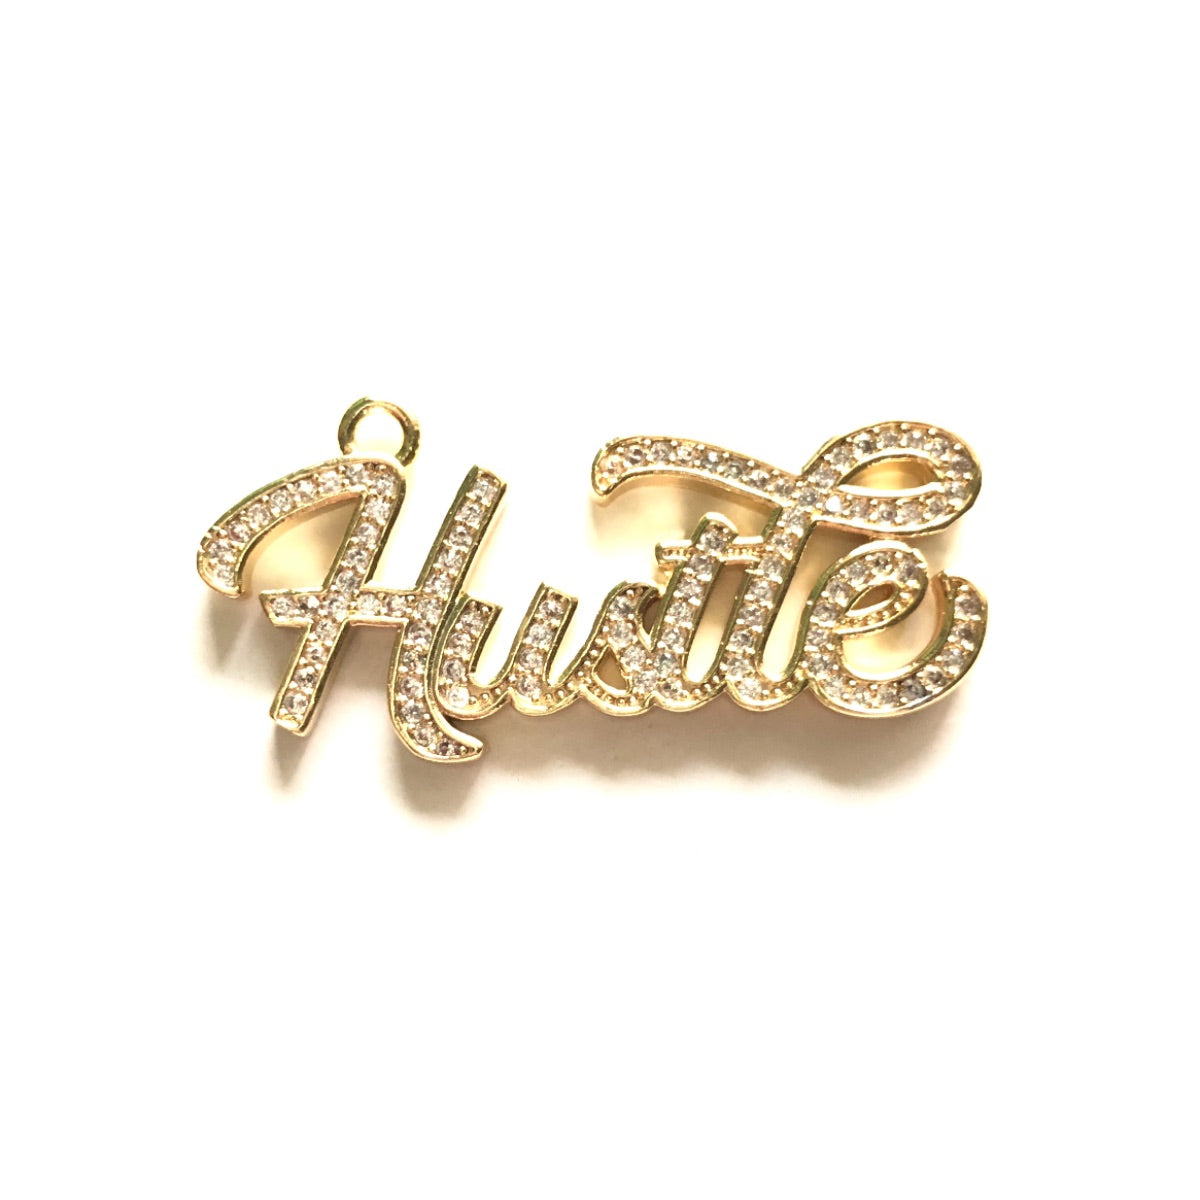 10pcs/lot 37.5*18mm CZ Paved Hustle Charms Gold CZ Paved Charms On Sale Words & Quotes Charms Beads Beyond